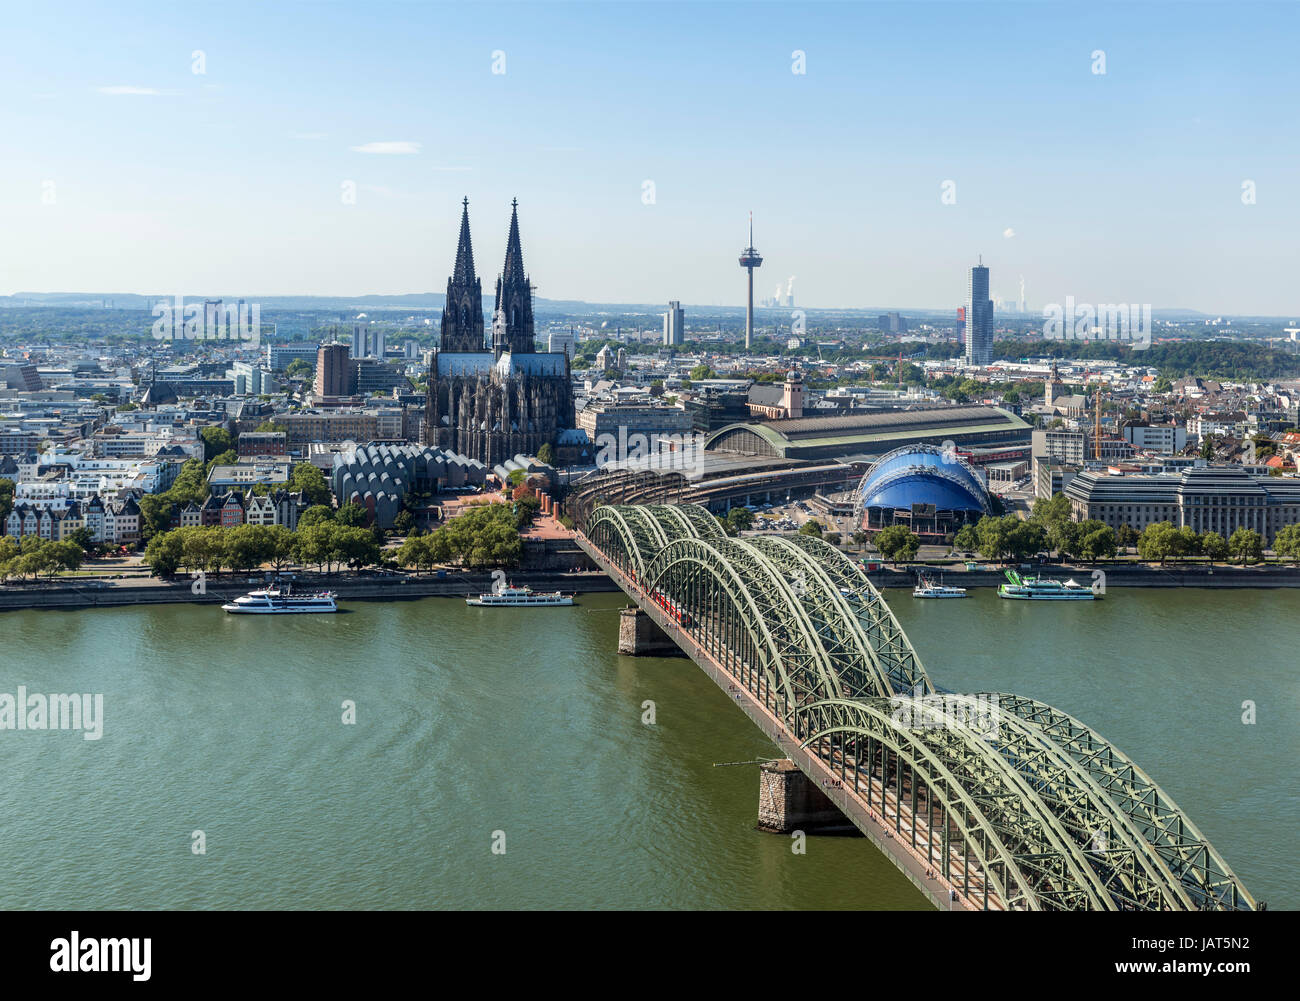 Cologne Cathedral. View over the River Rhine to Cologne Cathedral and Railway Station with the Hohenzollern Bridge in the foreground, Cologne, Germany Stock Photo